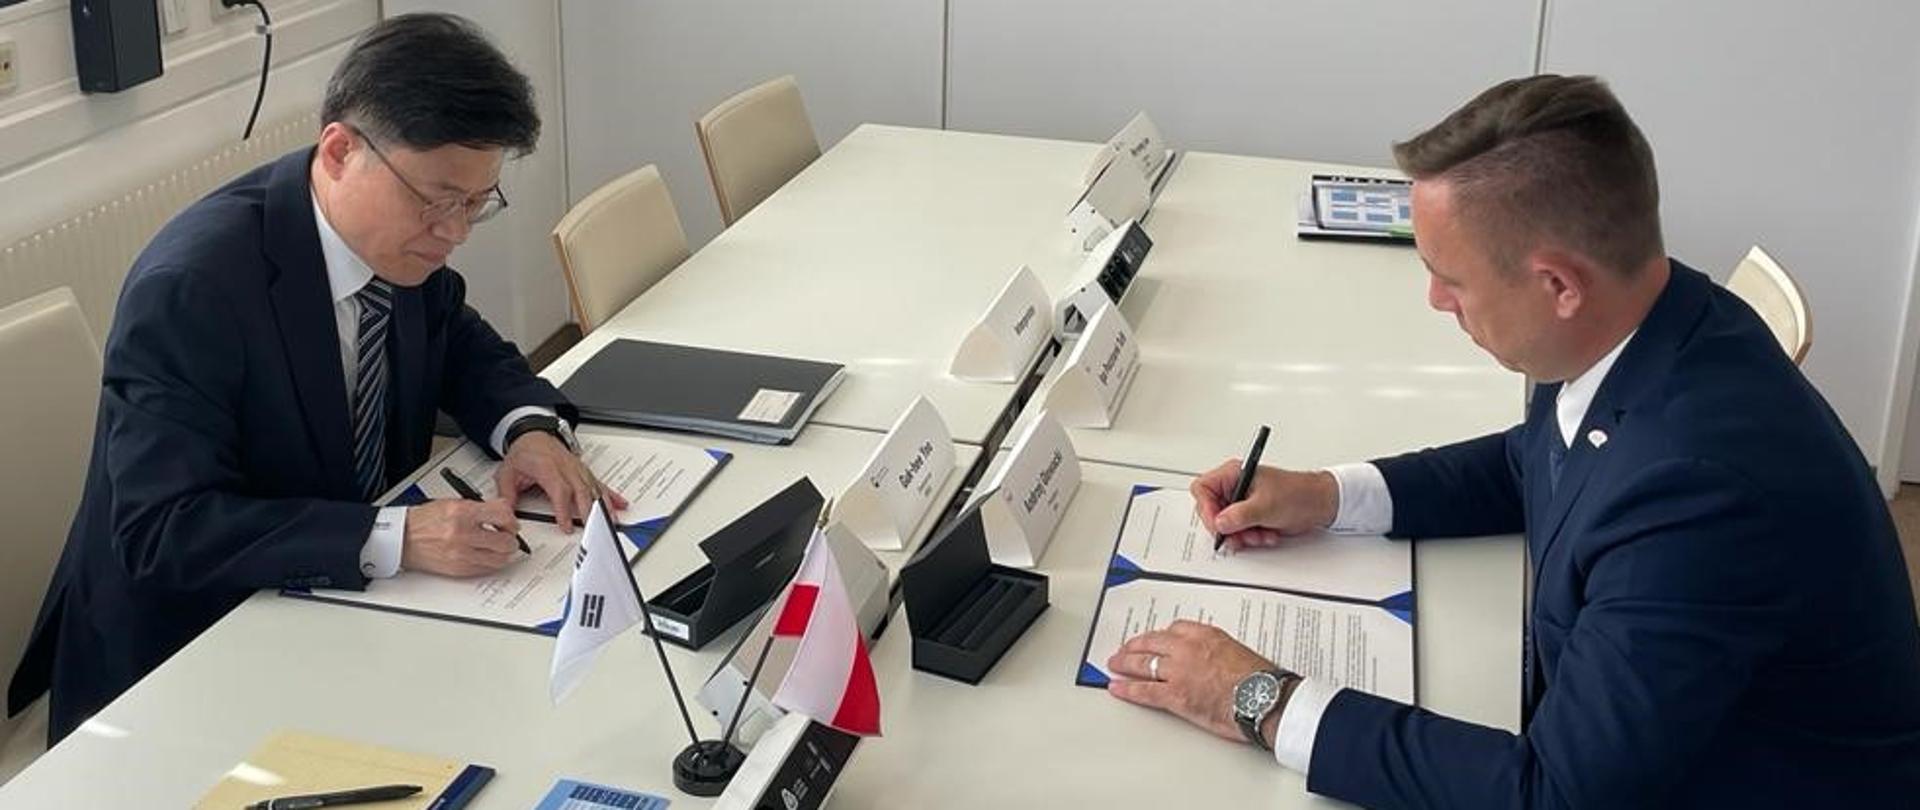 Gukhee YOO, Chairman of the Nuclear Safety and Security Commission of South Korea, and Andrzej Głowacki, President of the National Atomic Energy Agency, sign a cooperation agreement